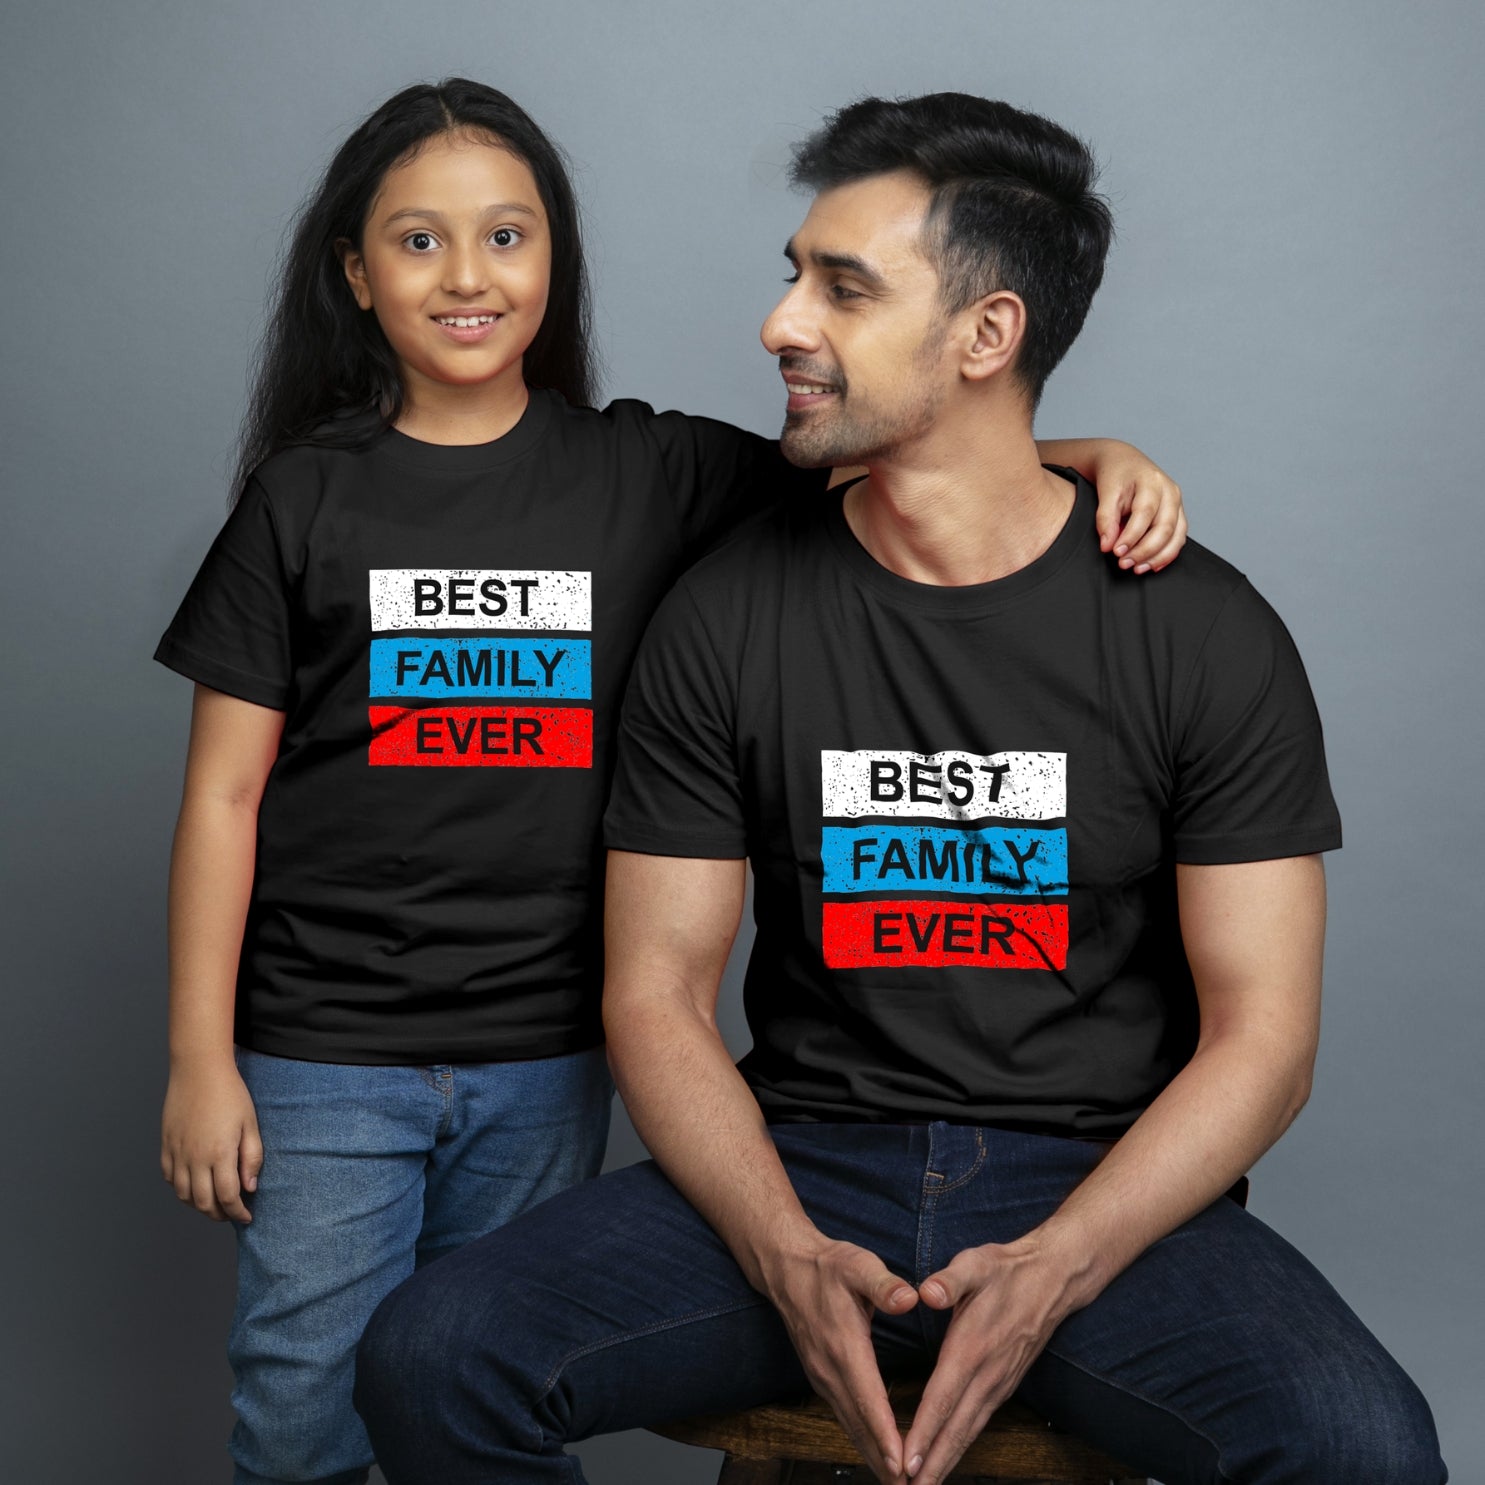 Family of 2 t shirt for Dad Daughter in Black Colour- Best Family Ever Variant